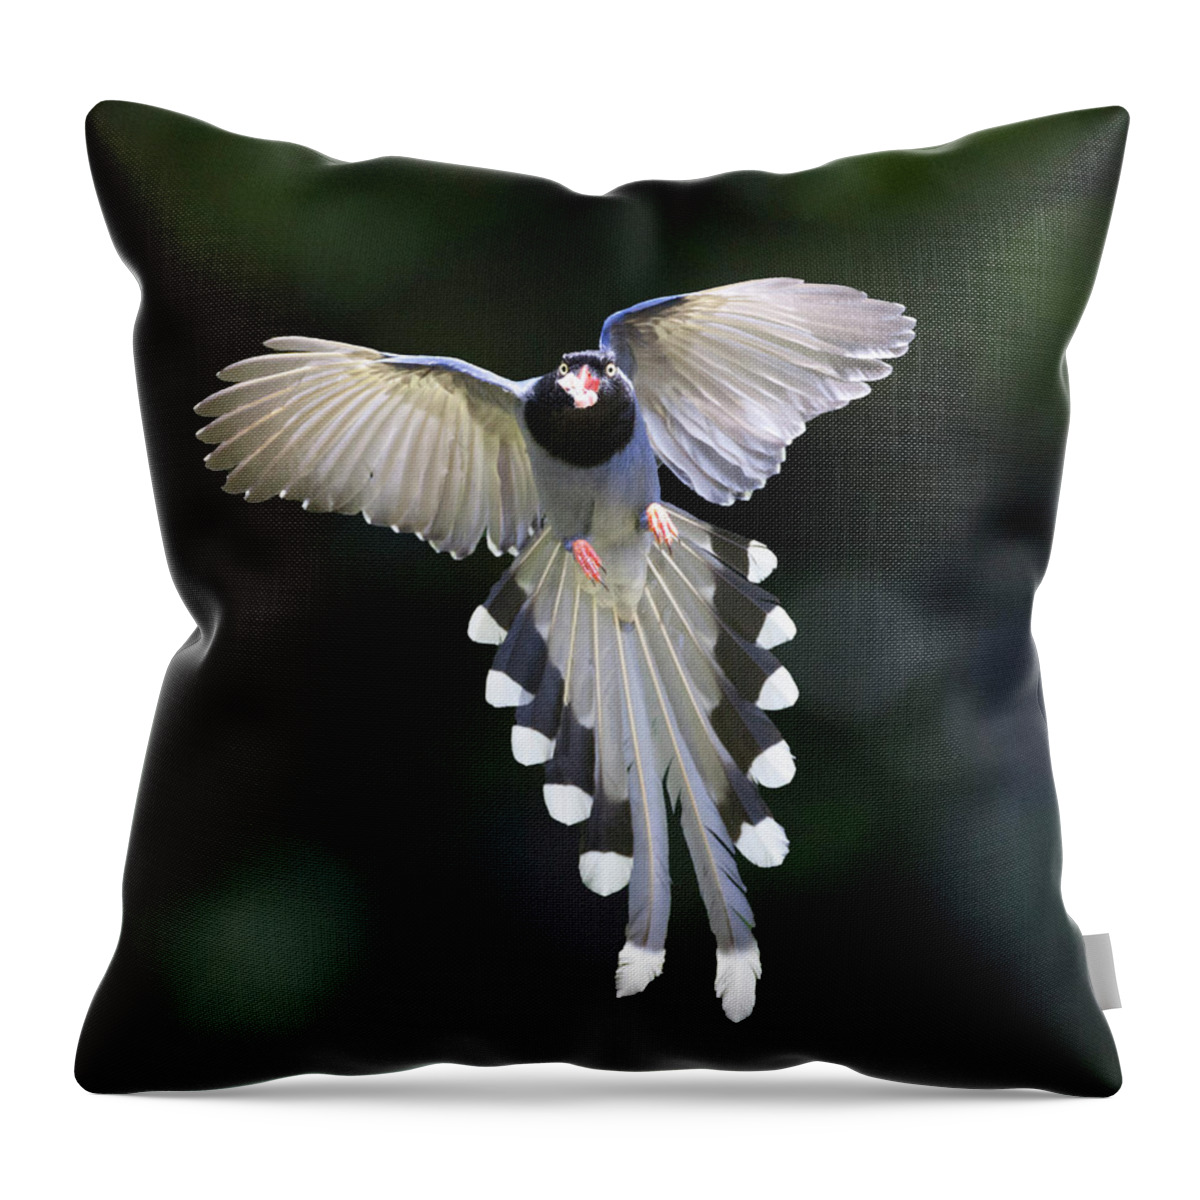 Magpie Throw Pillow featuring the photograph Blue Magpie Flying by Richard Mcmanus